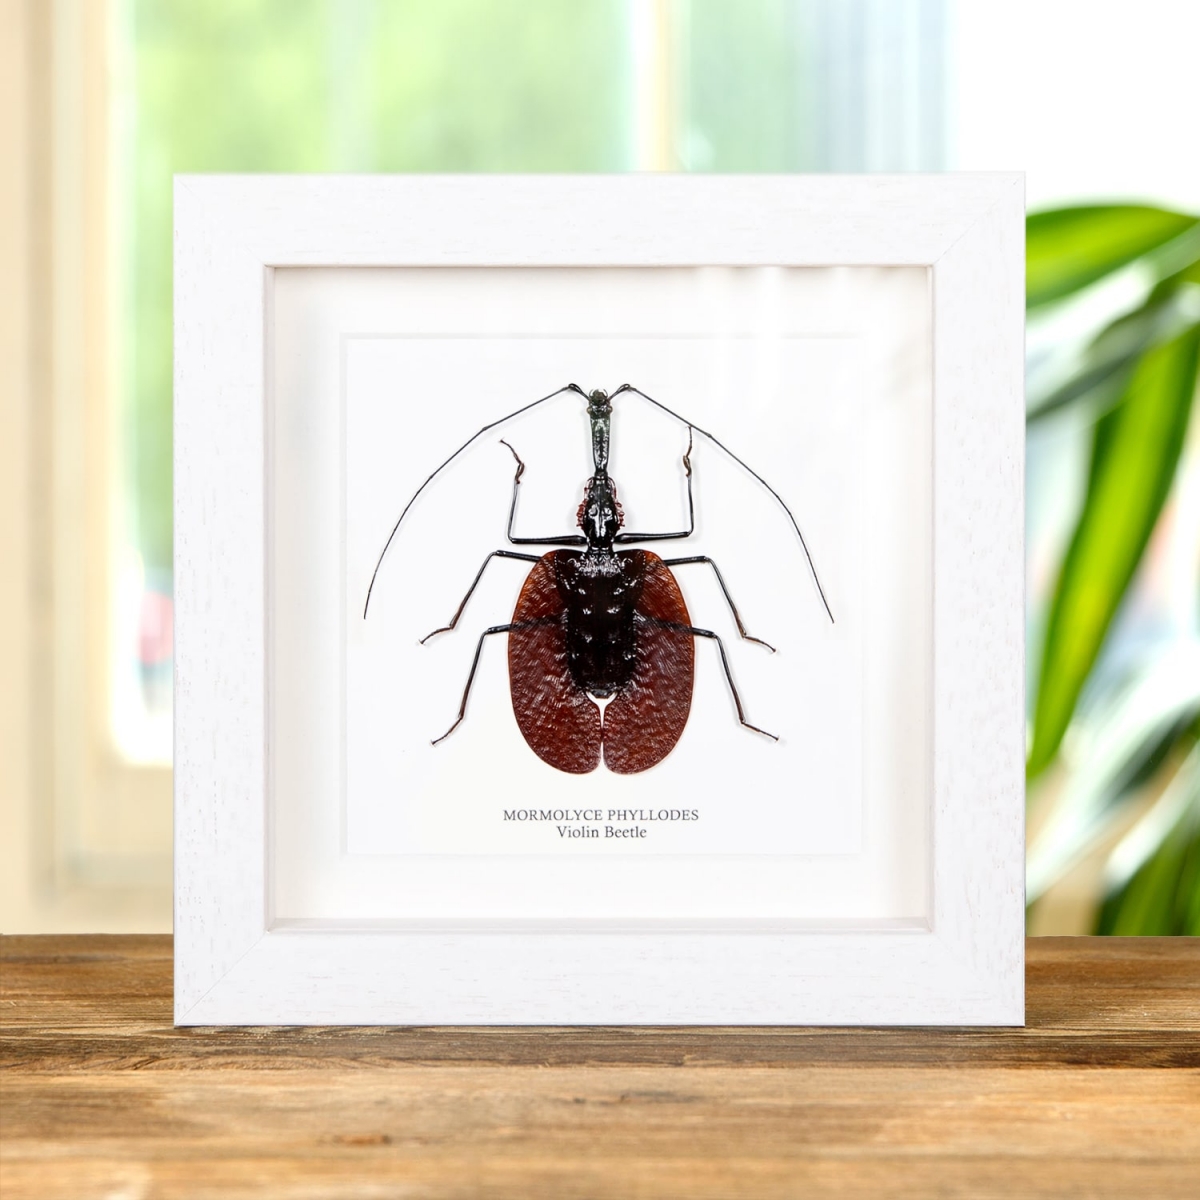 Violin Beetle in Box Frame (Mormolyce phyllodes)